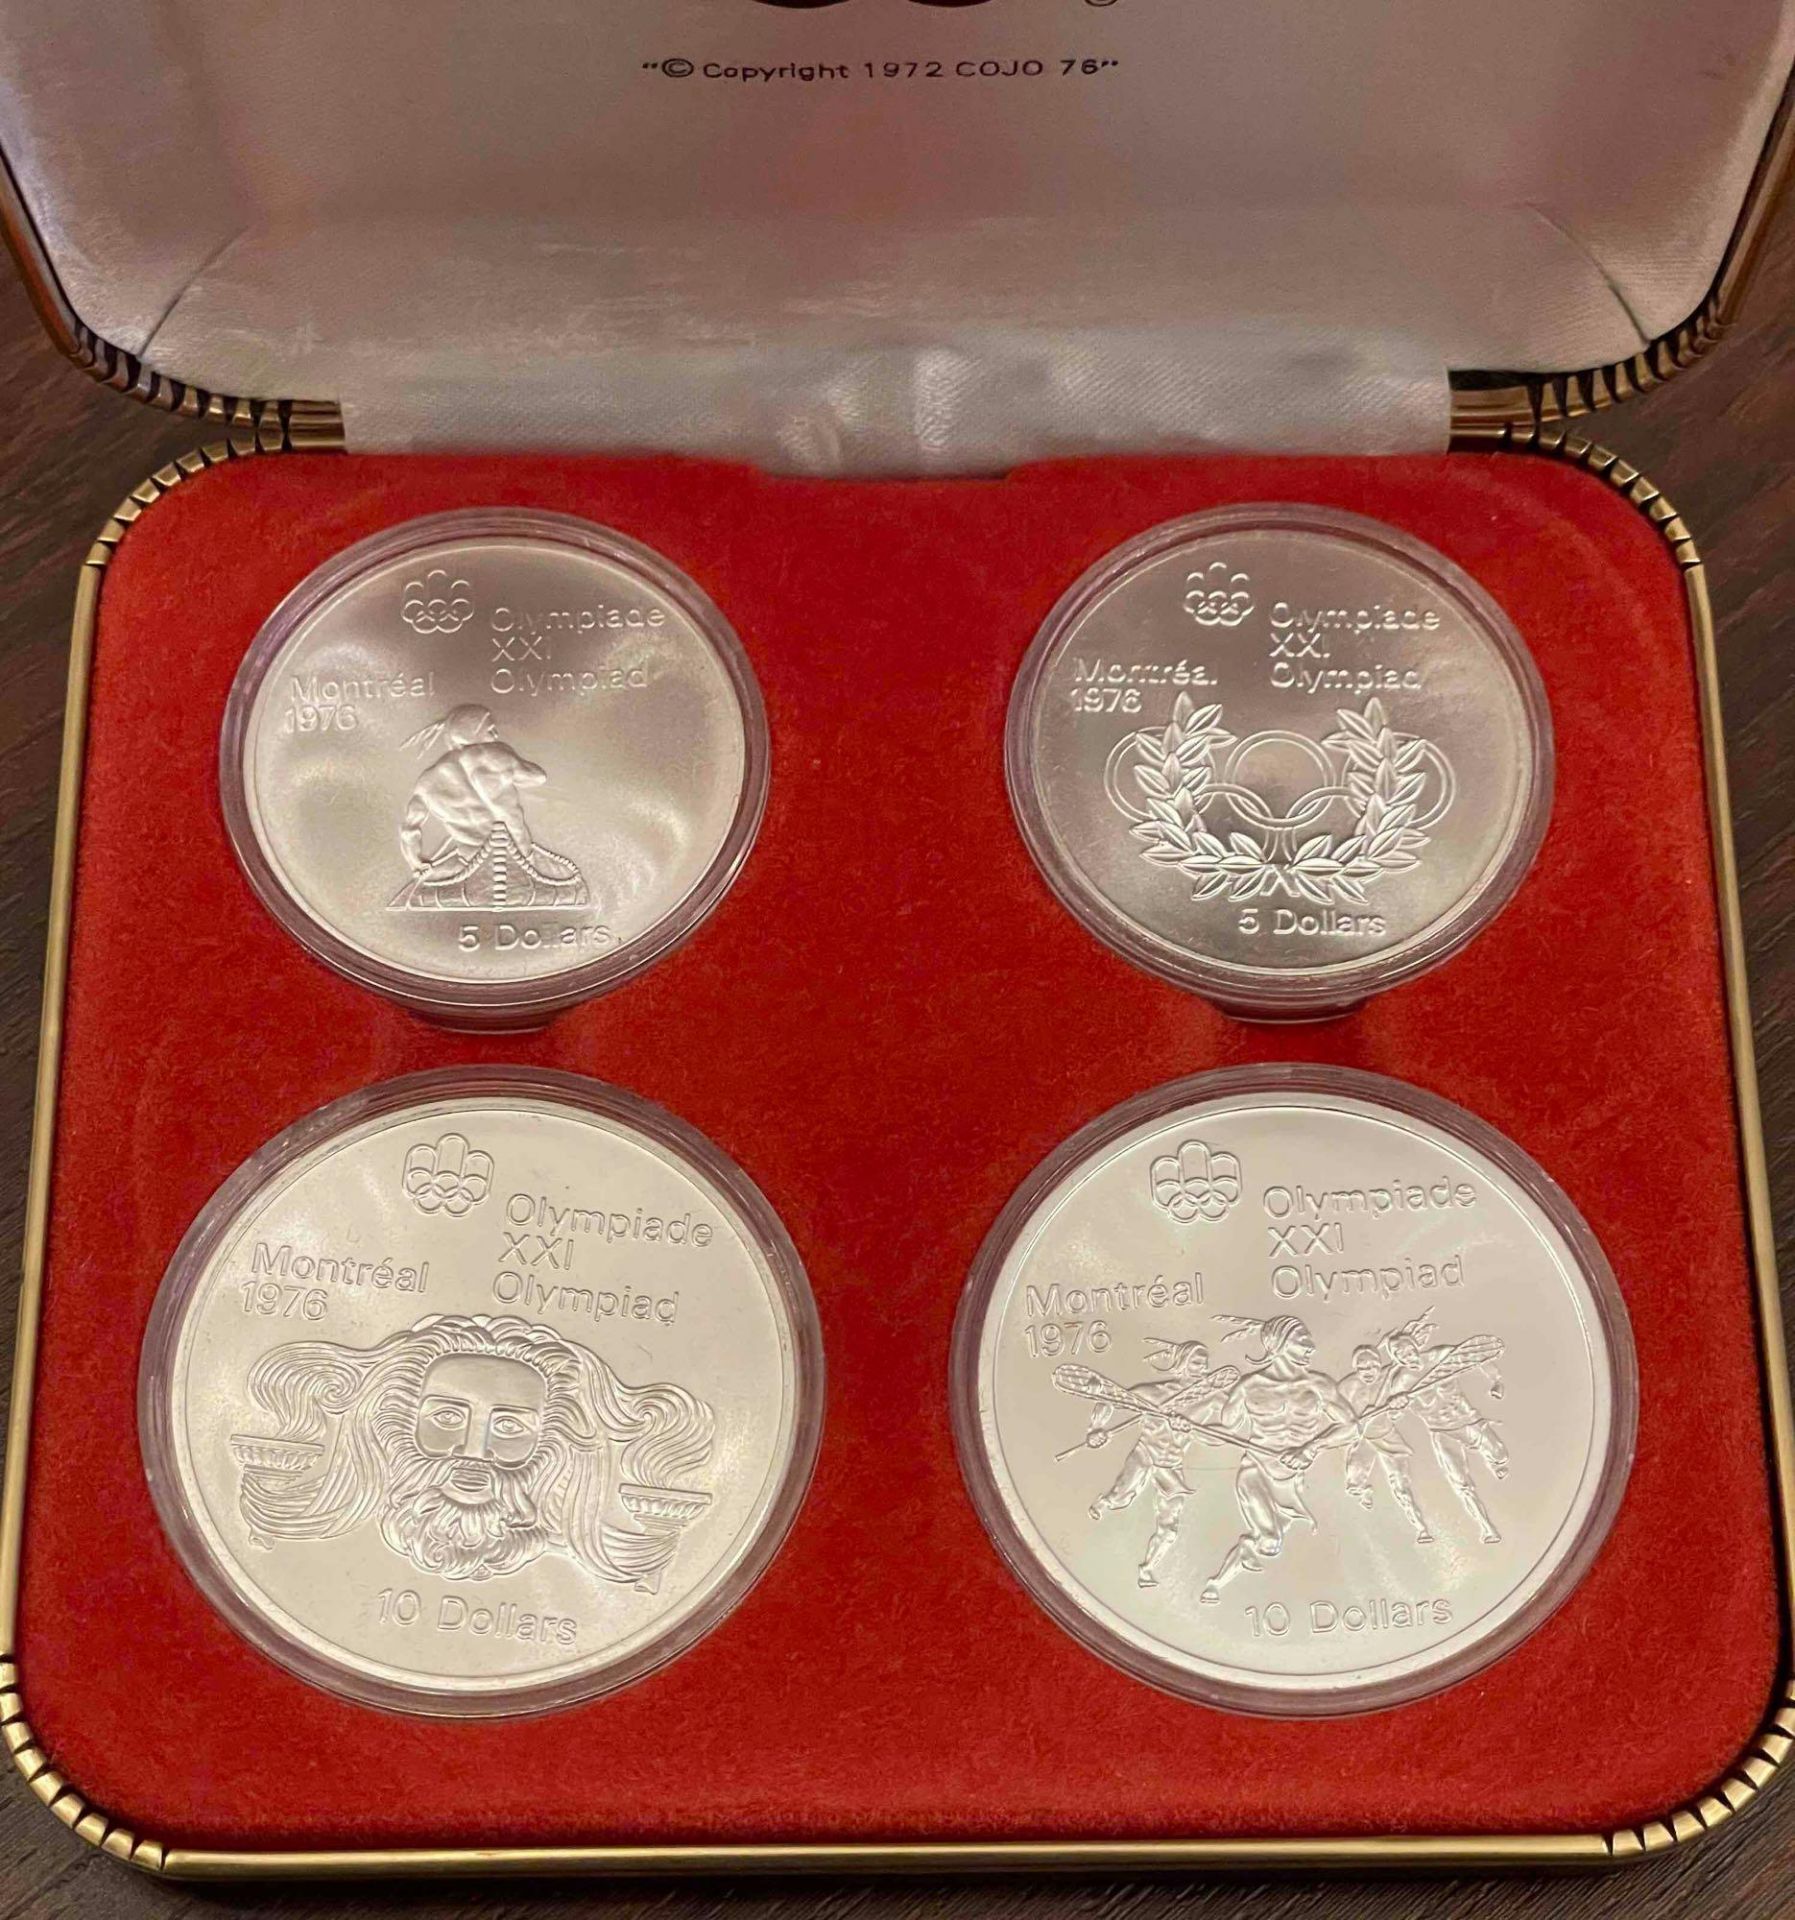 1976 Canada Montreal Olympics 4 Silver Coin Set, 4.3362 total oz